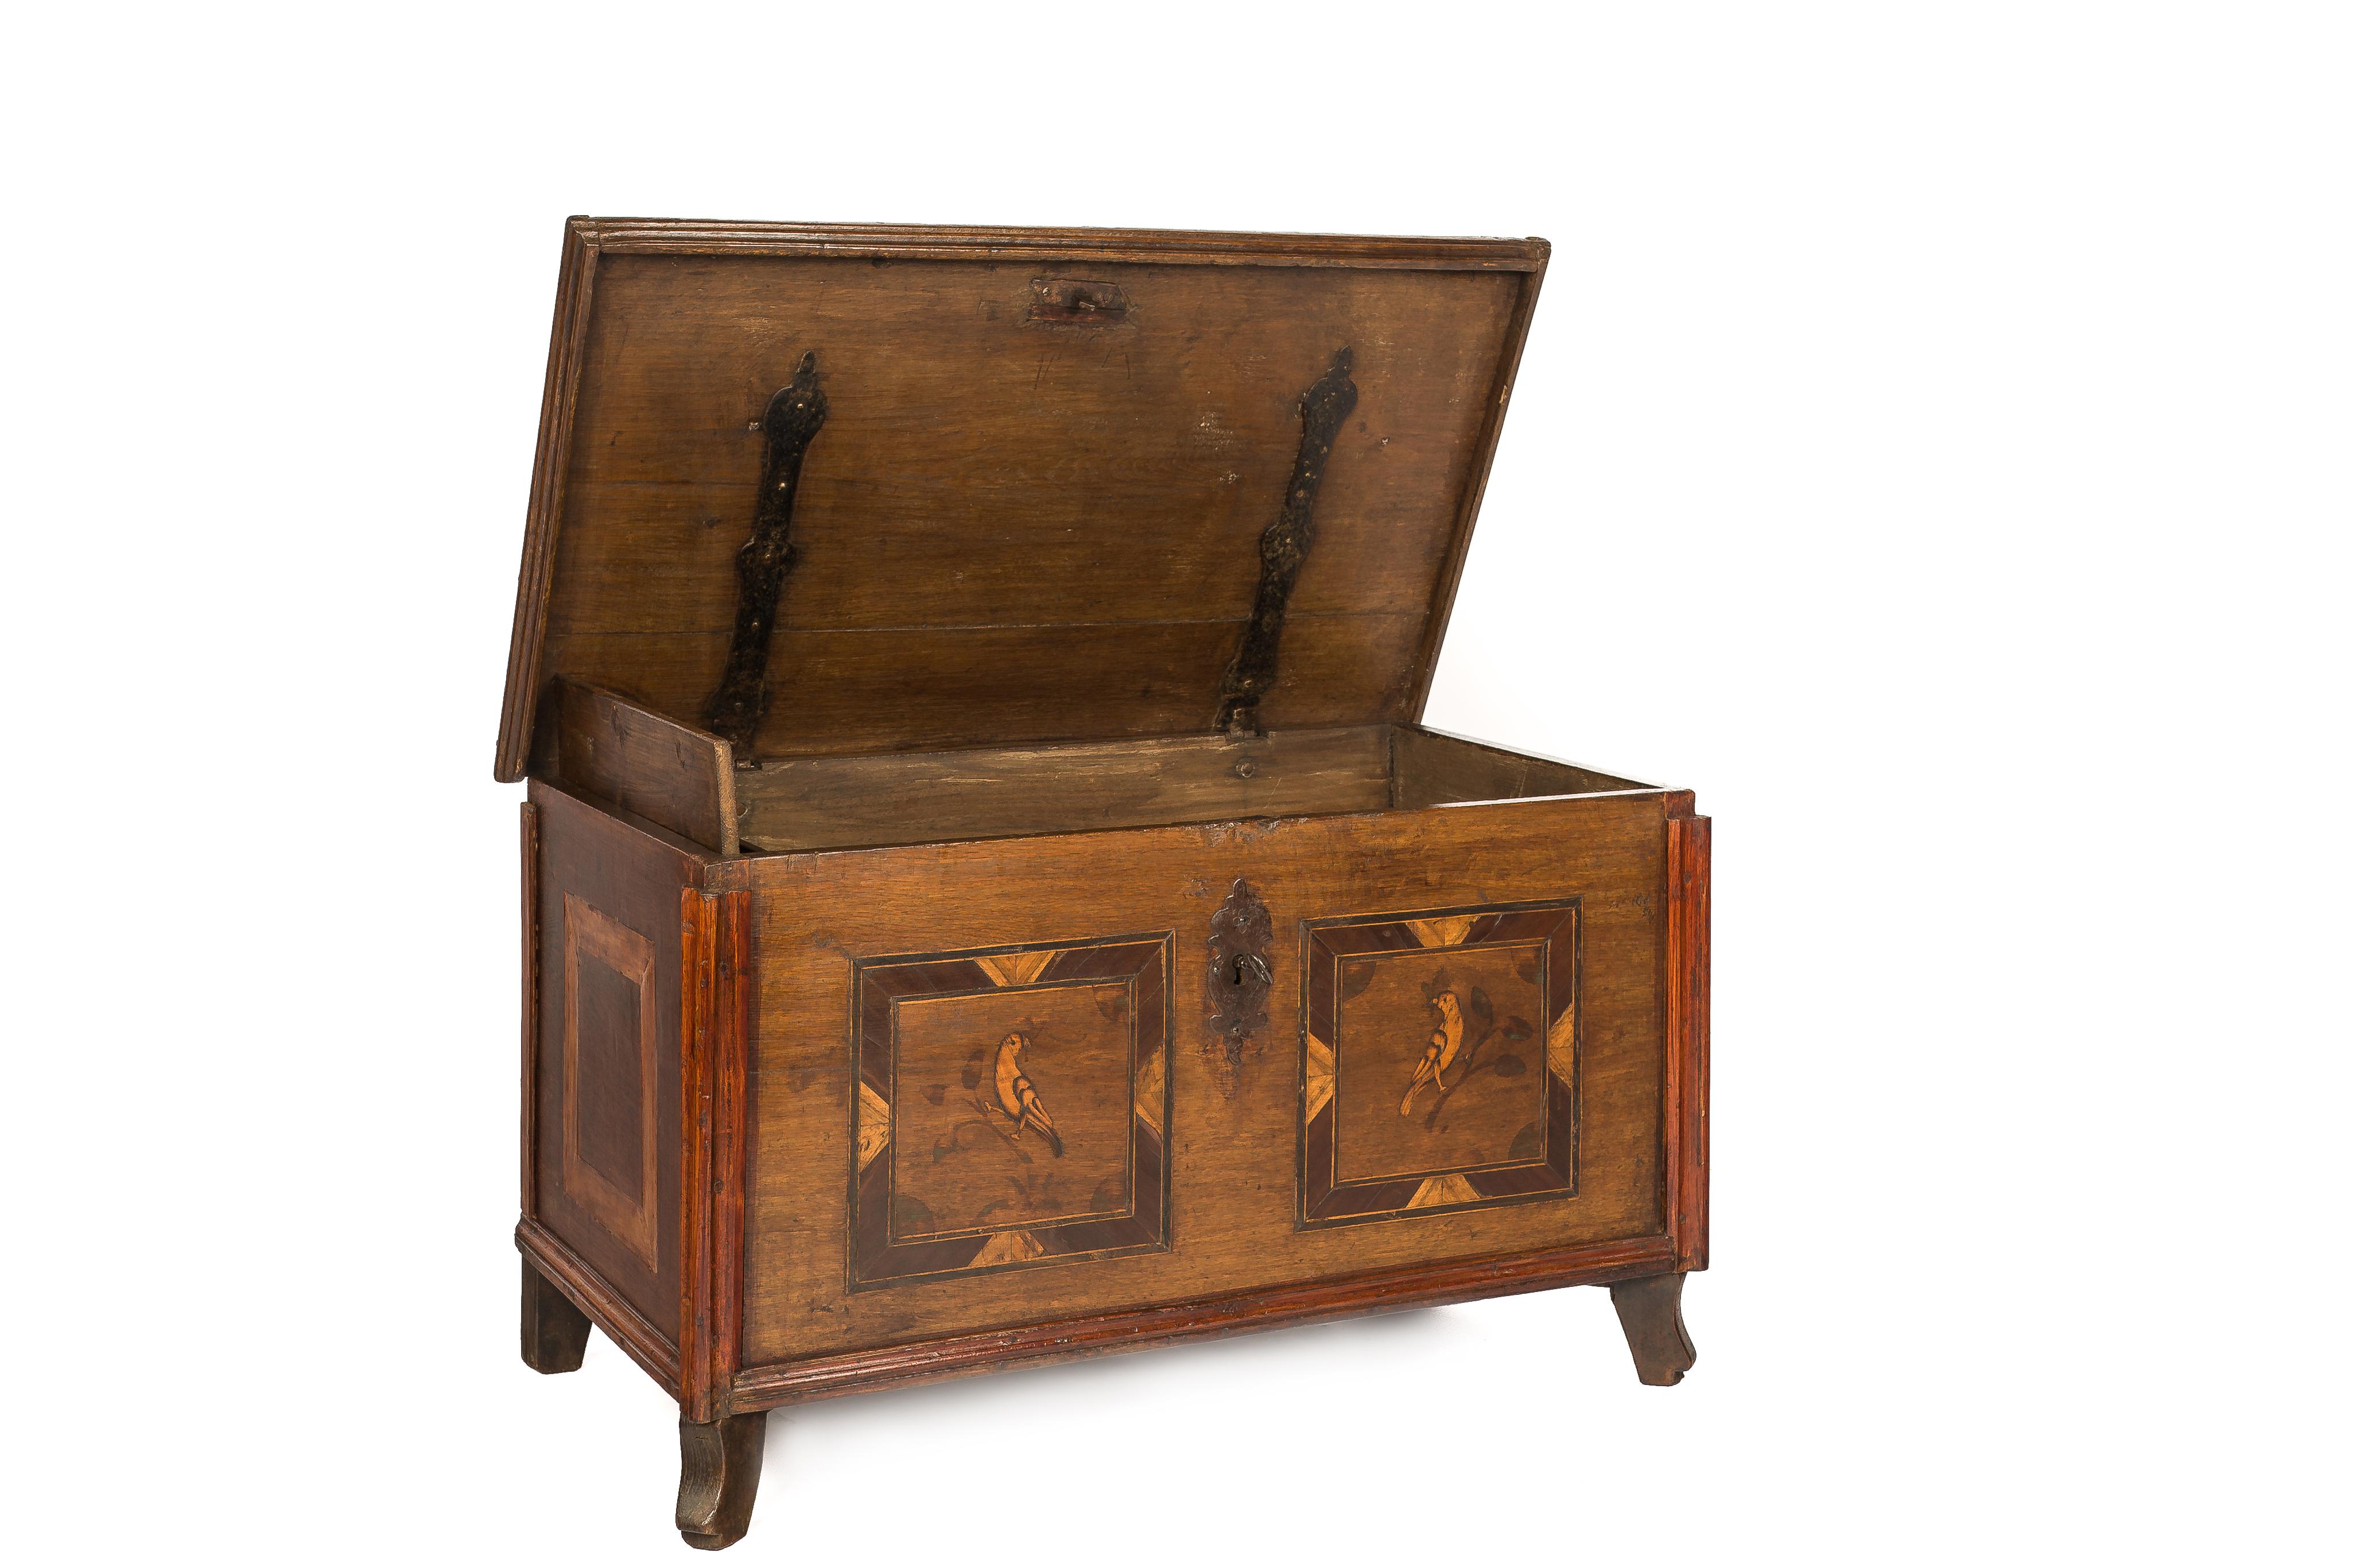 This rural trunk was made in the countryside of eastern Germany in the late 18th century. The trunk or chest was completely made in solid European summer oak. All four sides and lid were made from a single board of oak timber. The front of the piece